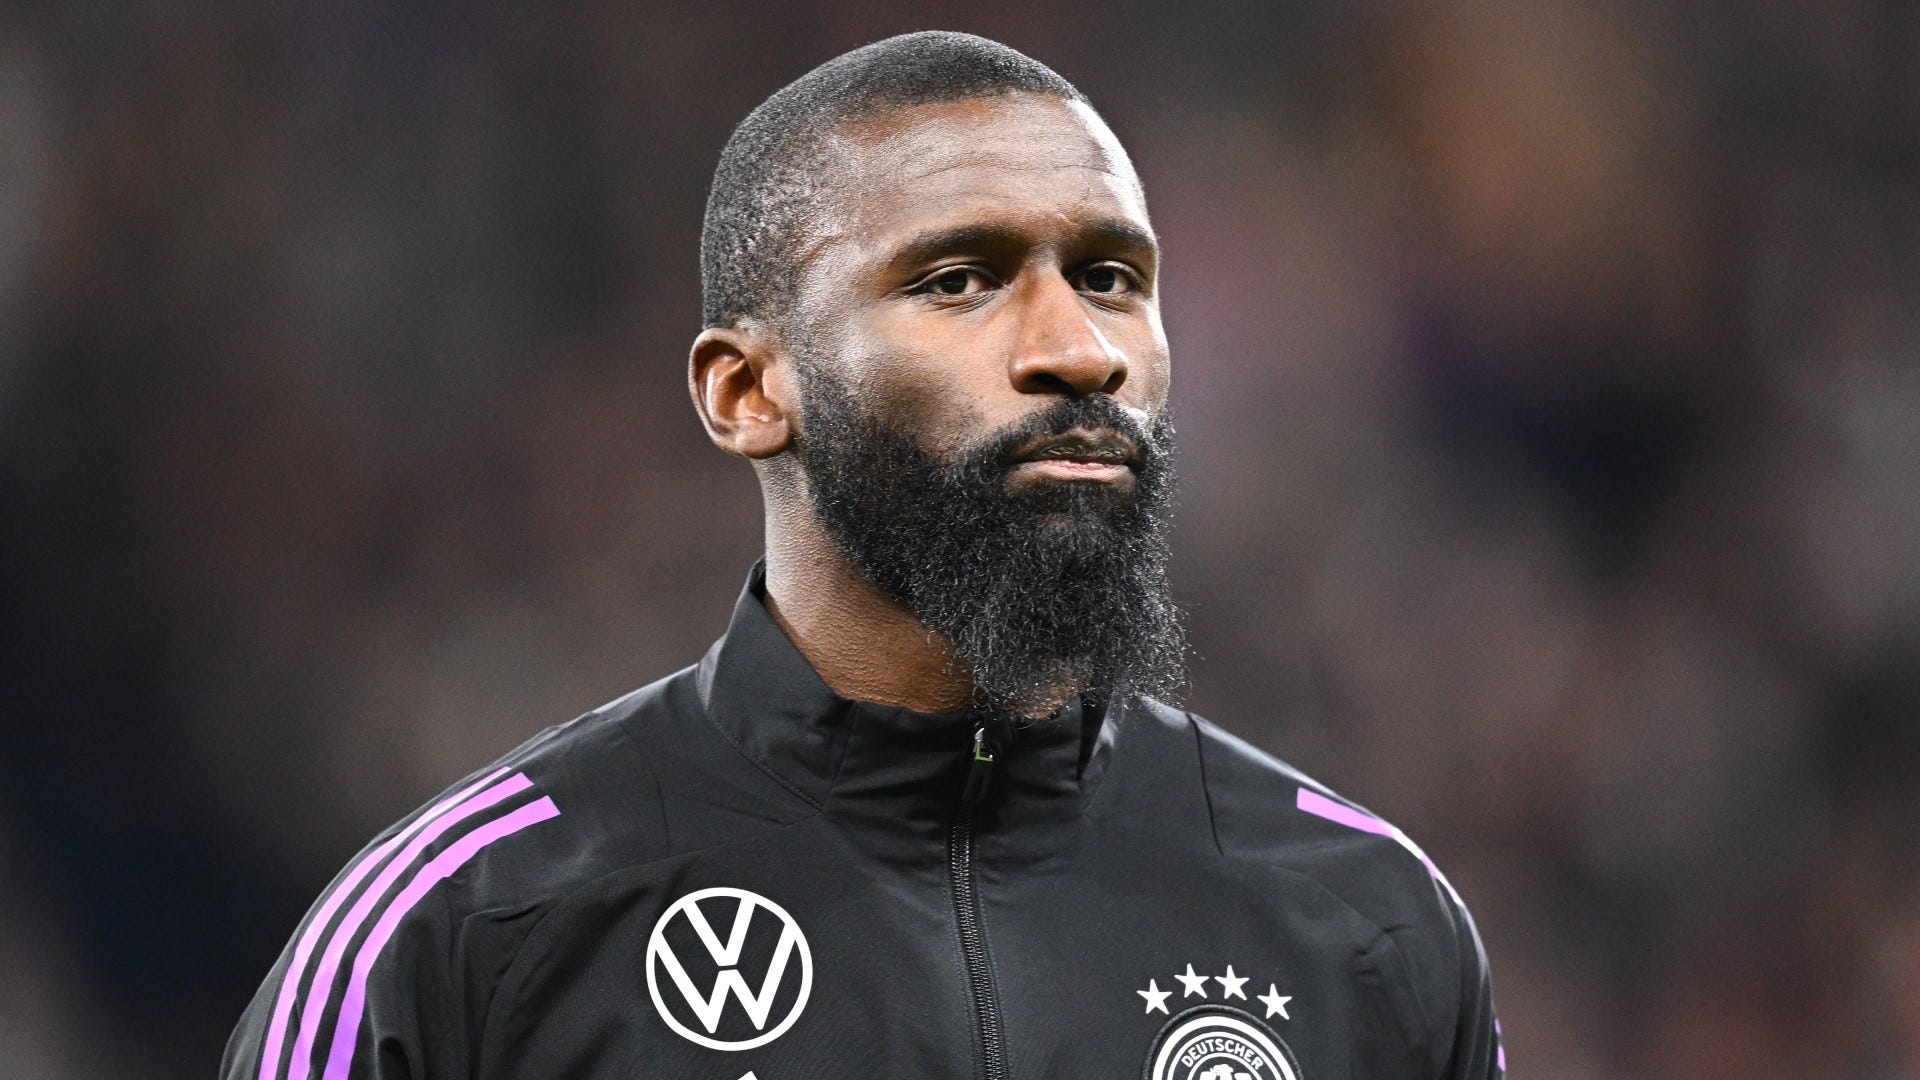 Antonio Rudiger speaks out on astounding ISIS links made by former German media chief - as Real Madrid defender promises legal action over vile remarks